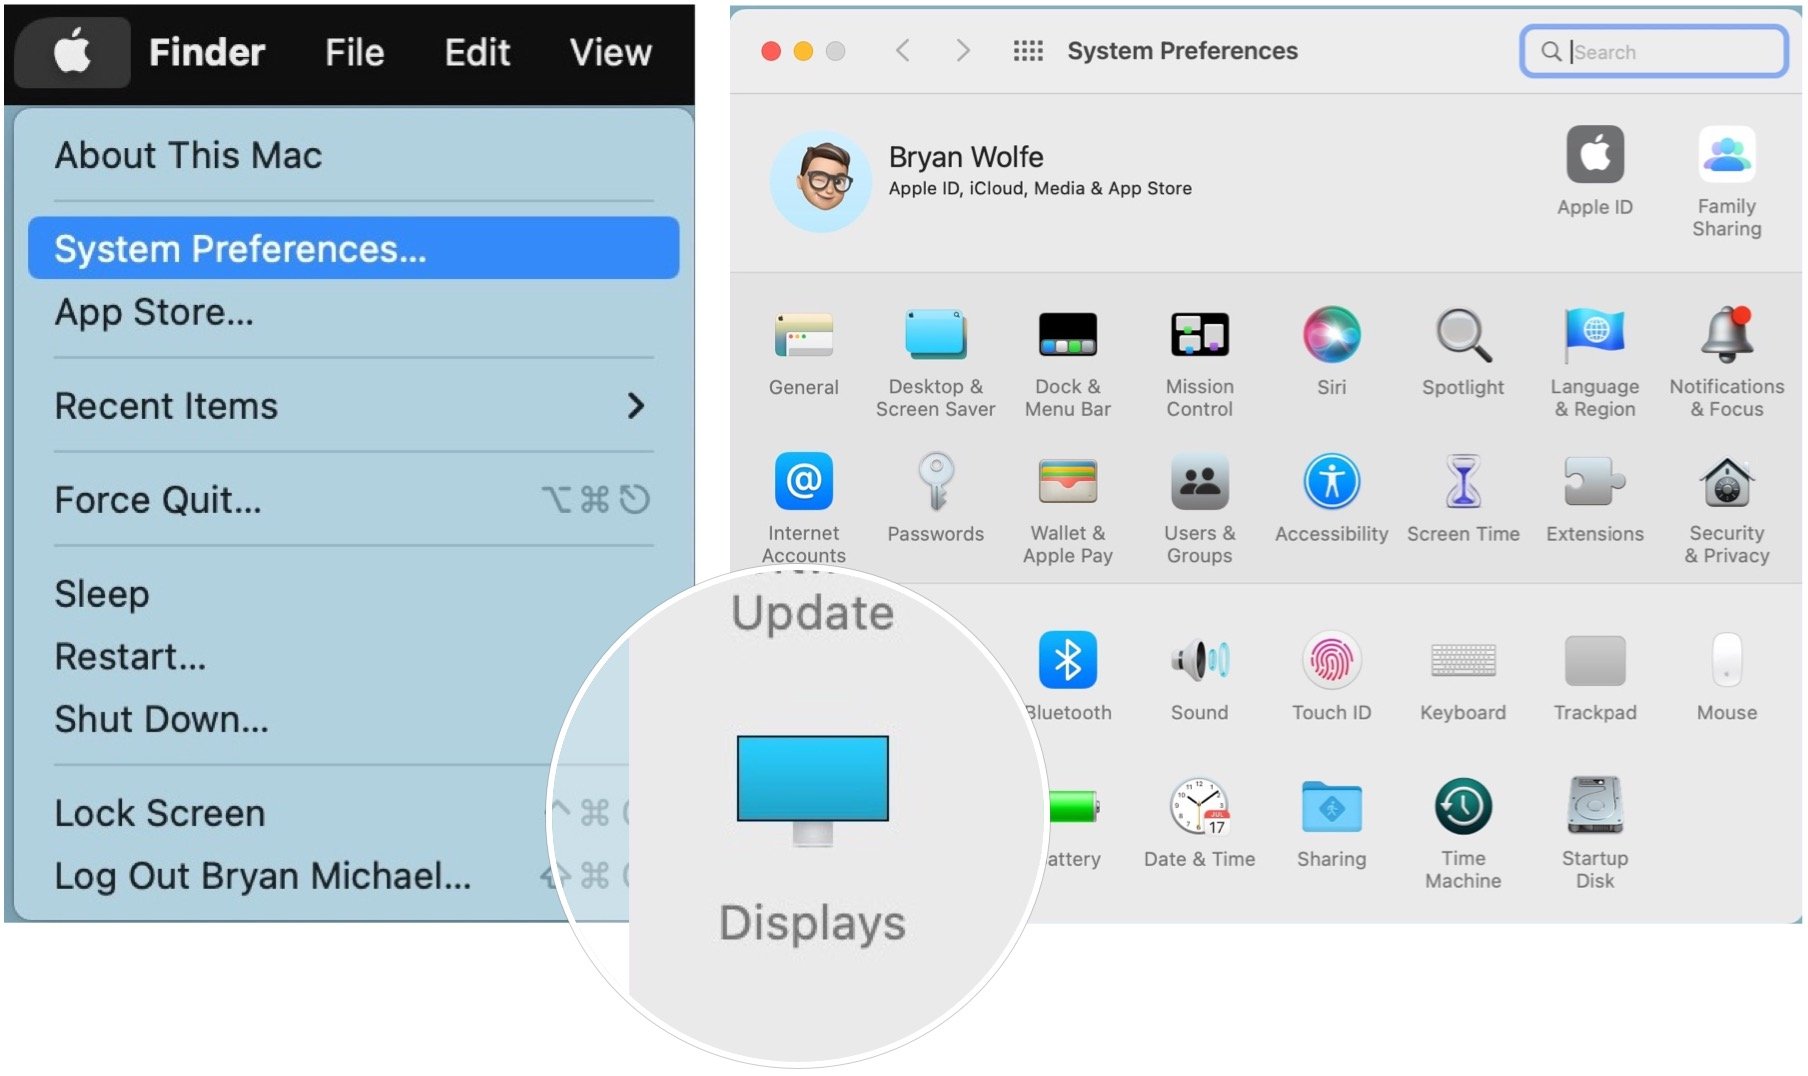 To set up Universal Control on Mac, choose the Apple icon at the top left of the device. Select System Preferences from the pull-down menu and pick Displays. 